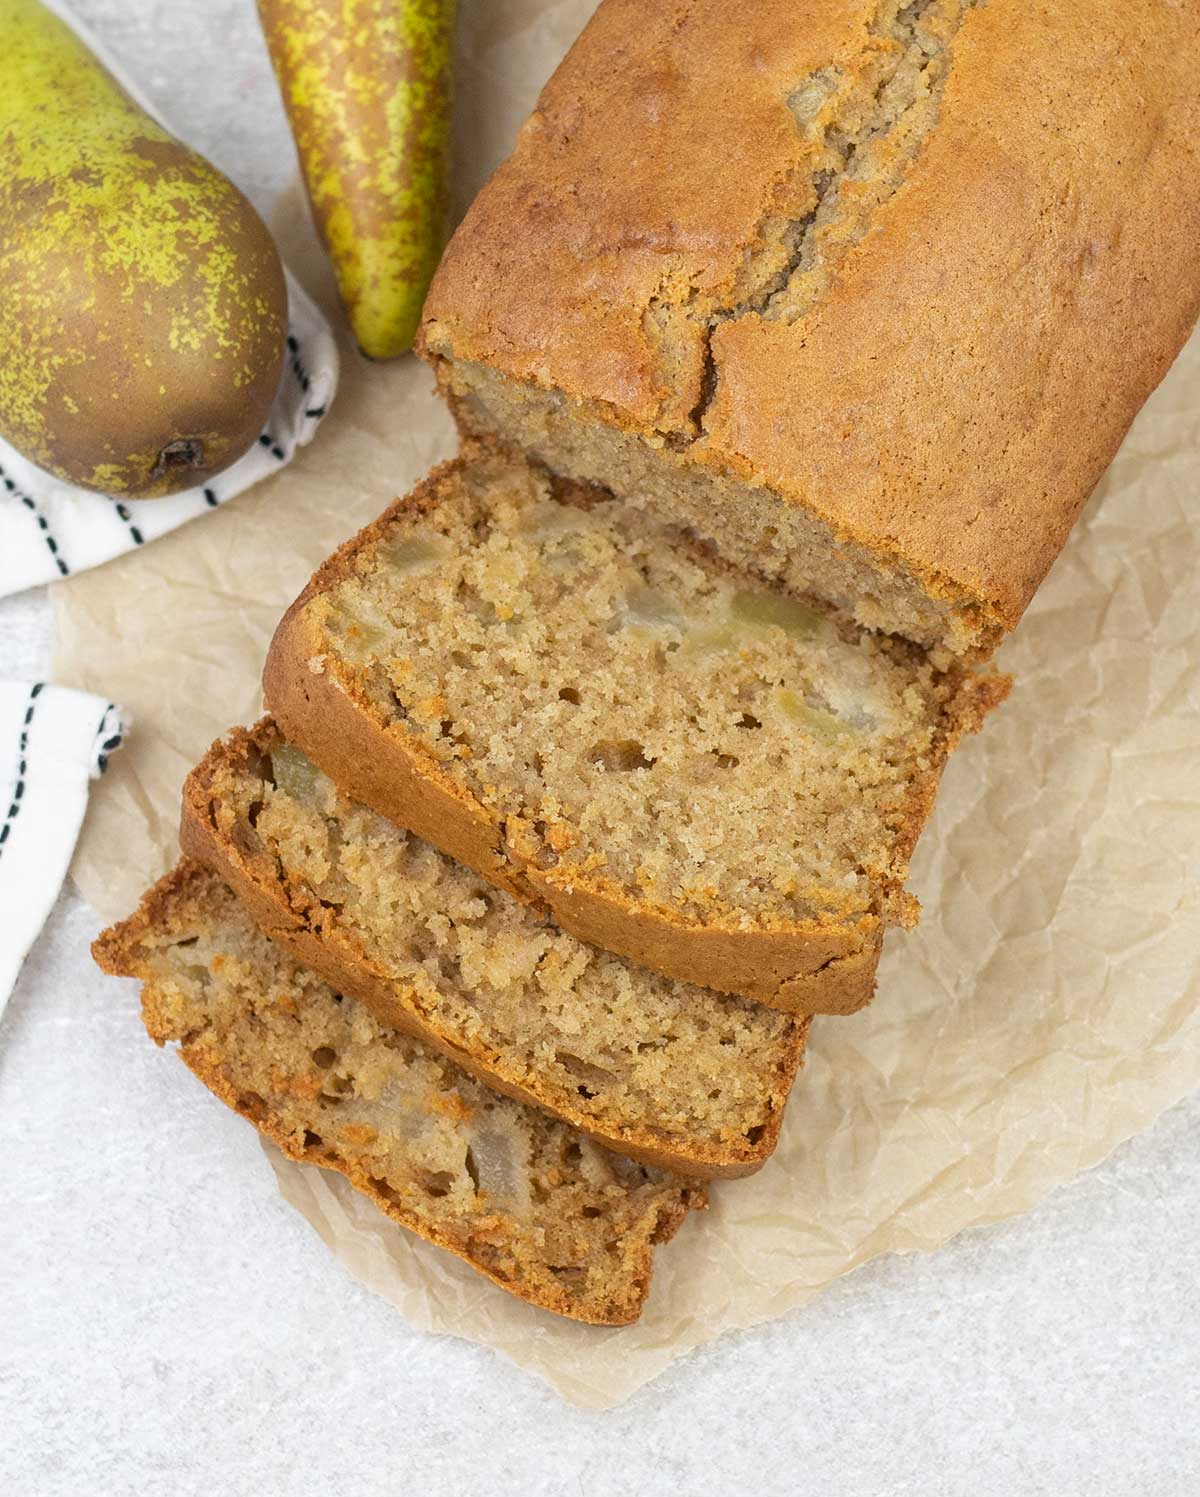 Pear Bread along with some pears in the background